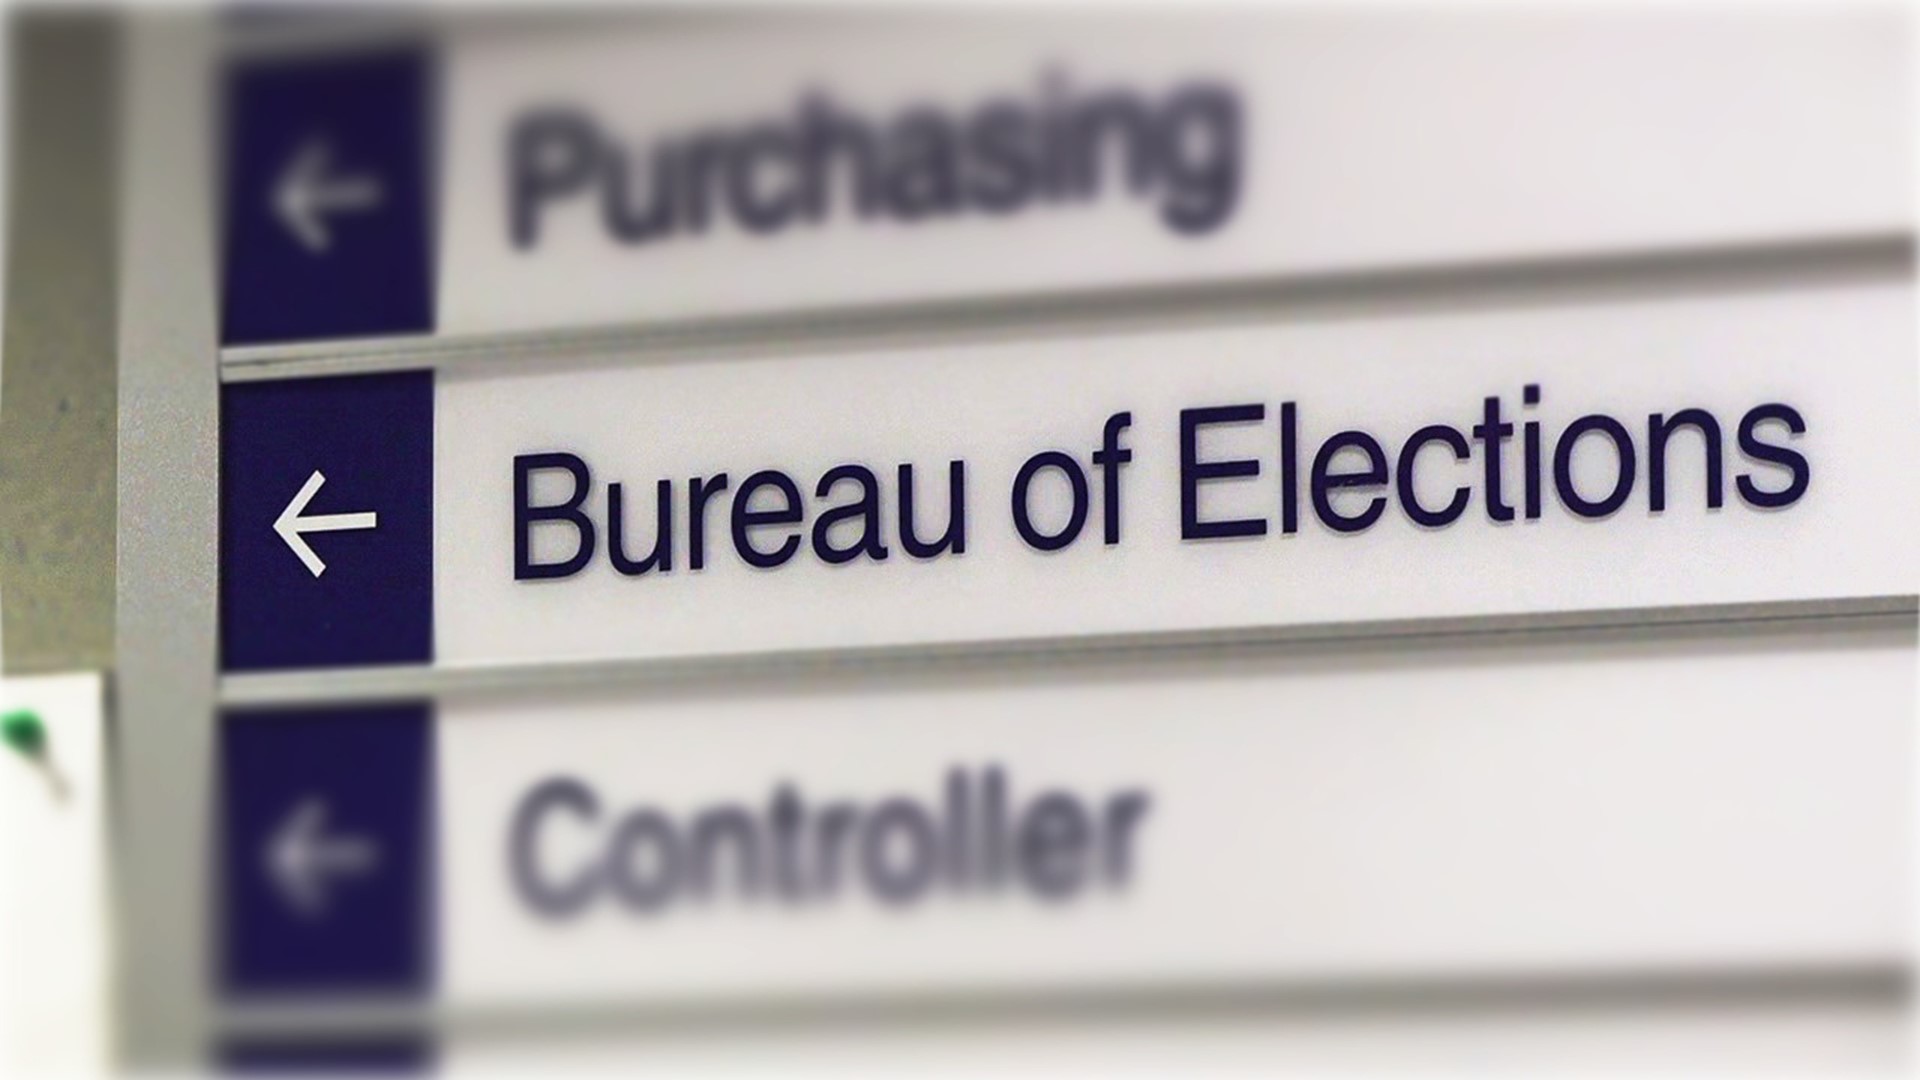 Emily Cook was announced as Acting Director of the Bureau of Elections Monday evening.